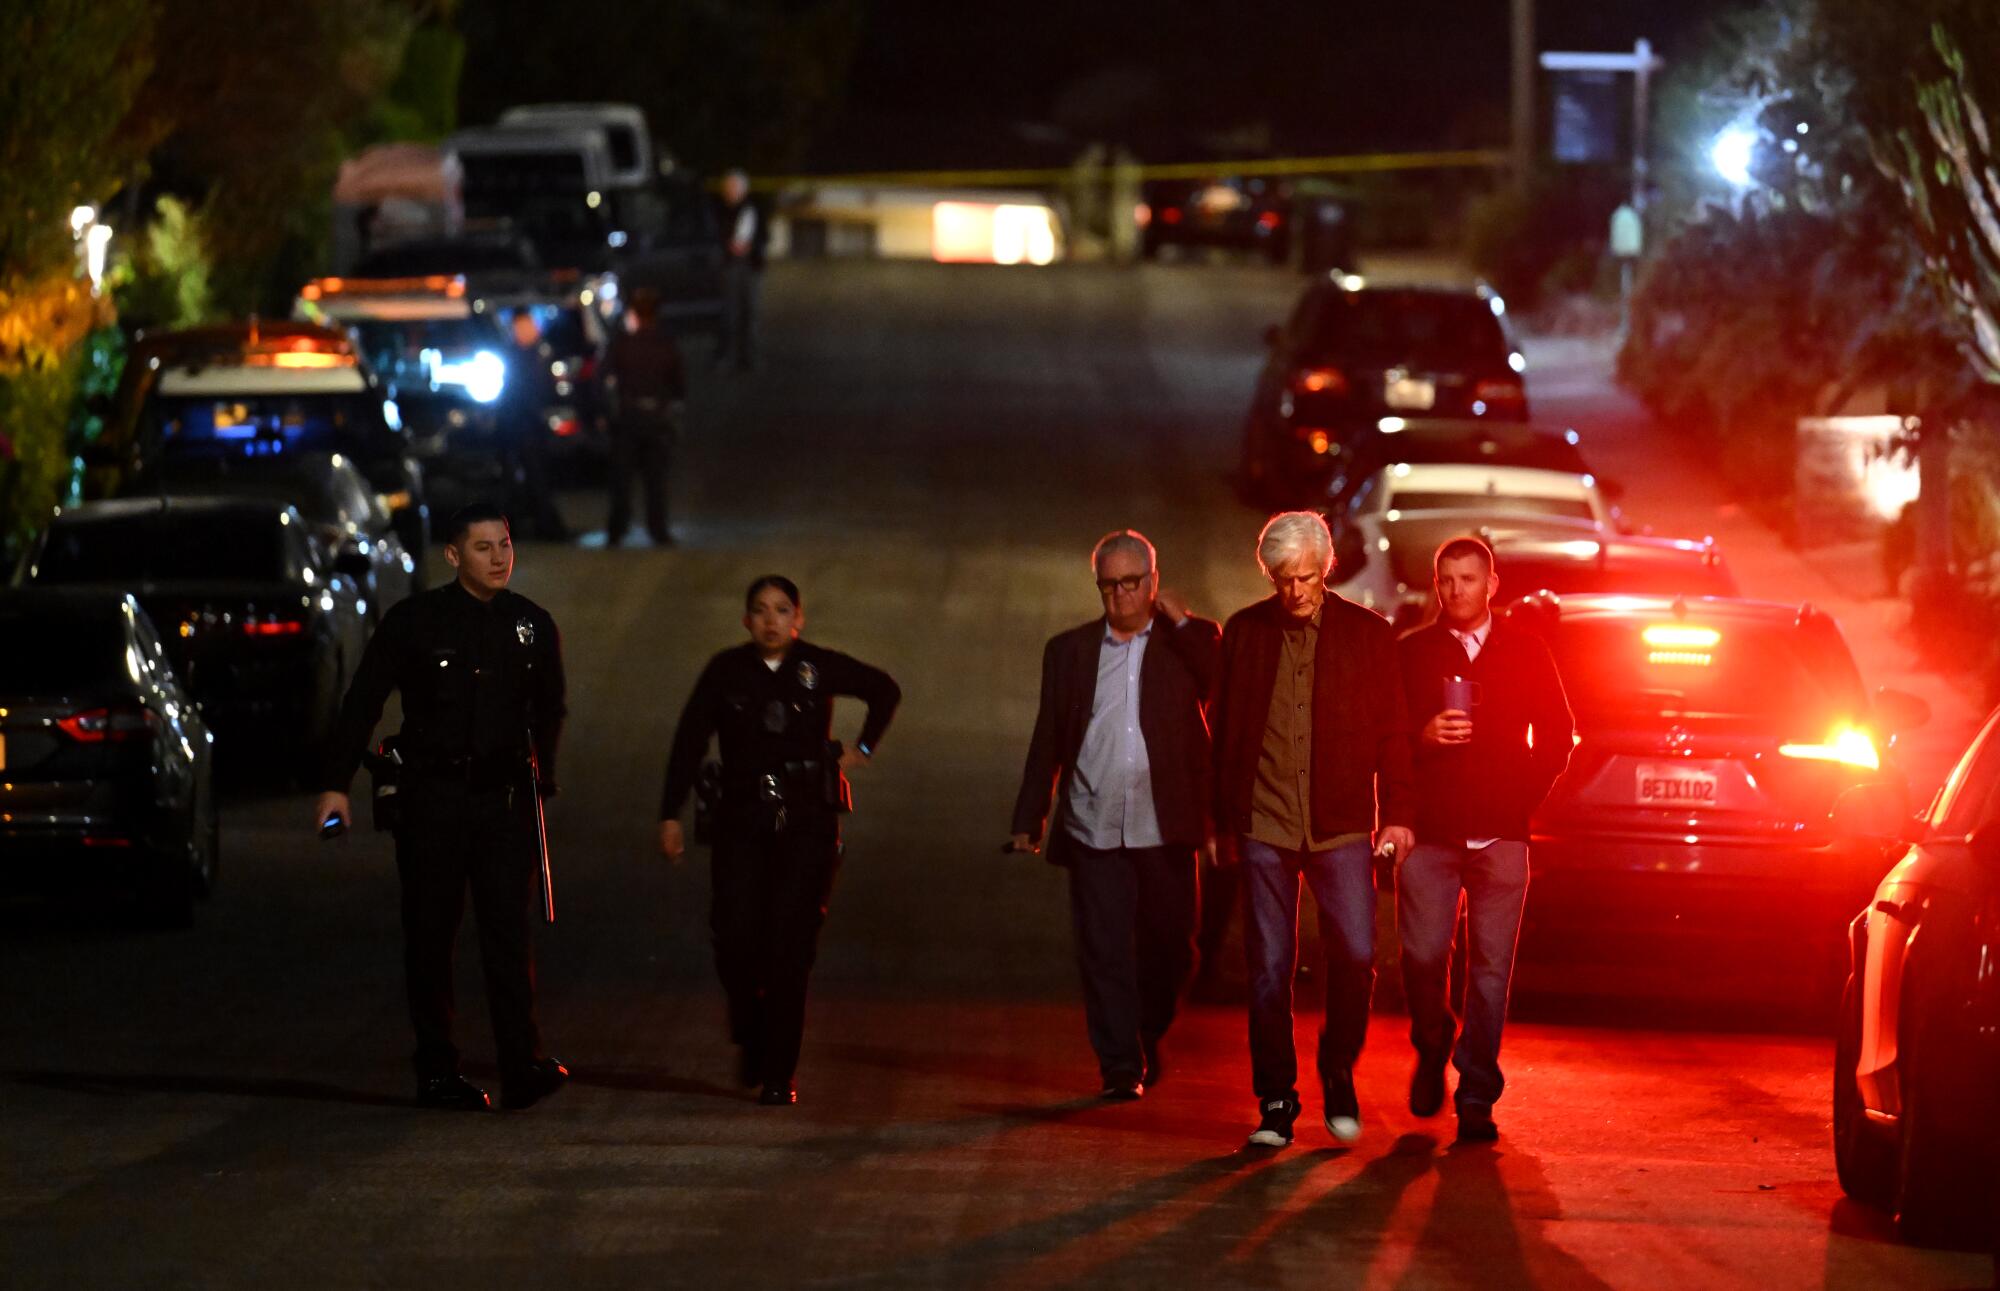 Keith Morrison, second from right, walks with police investigators down the street from Matthew Perry's house.